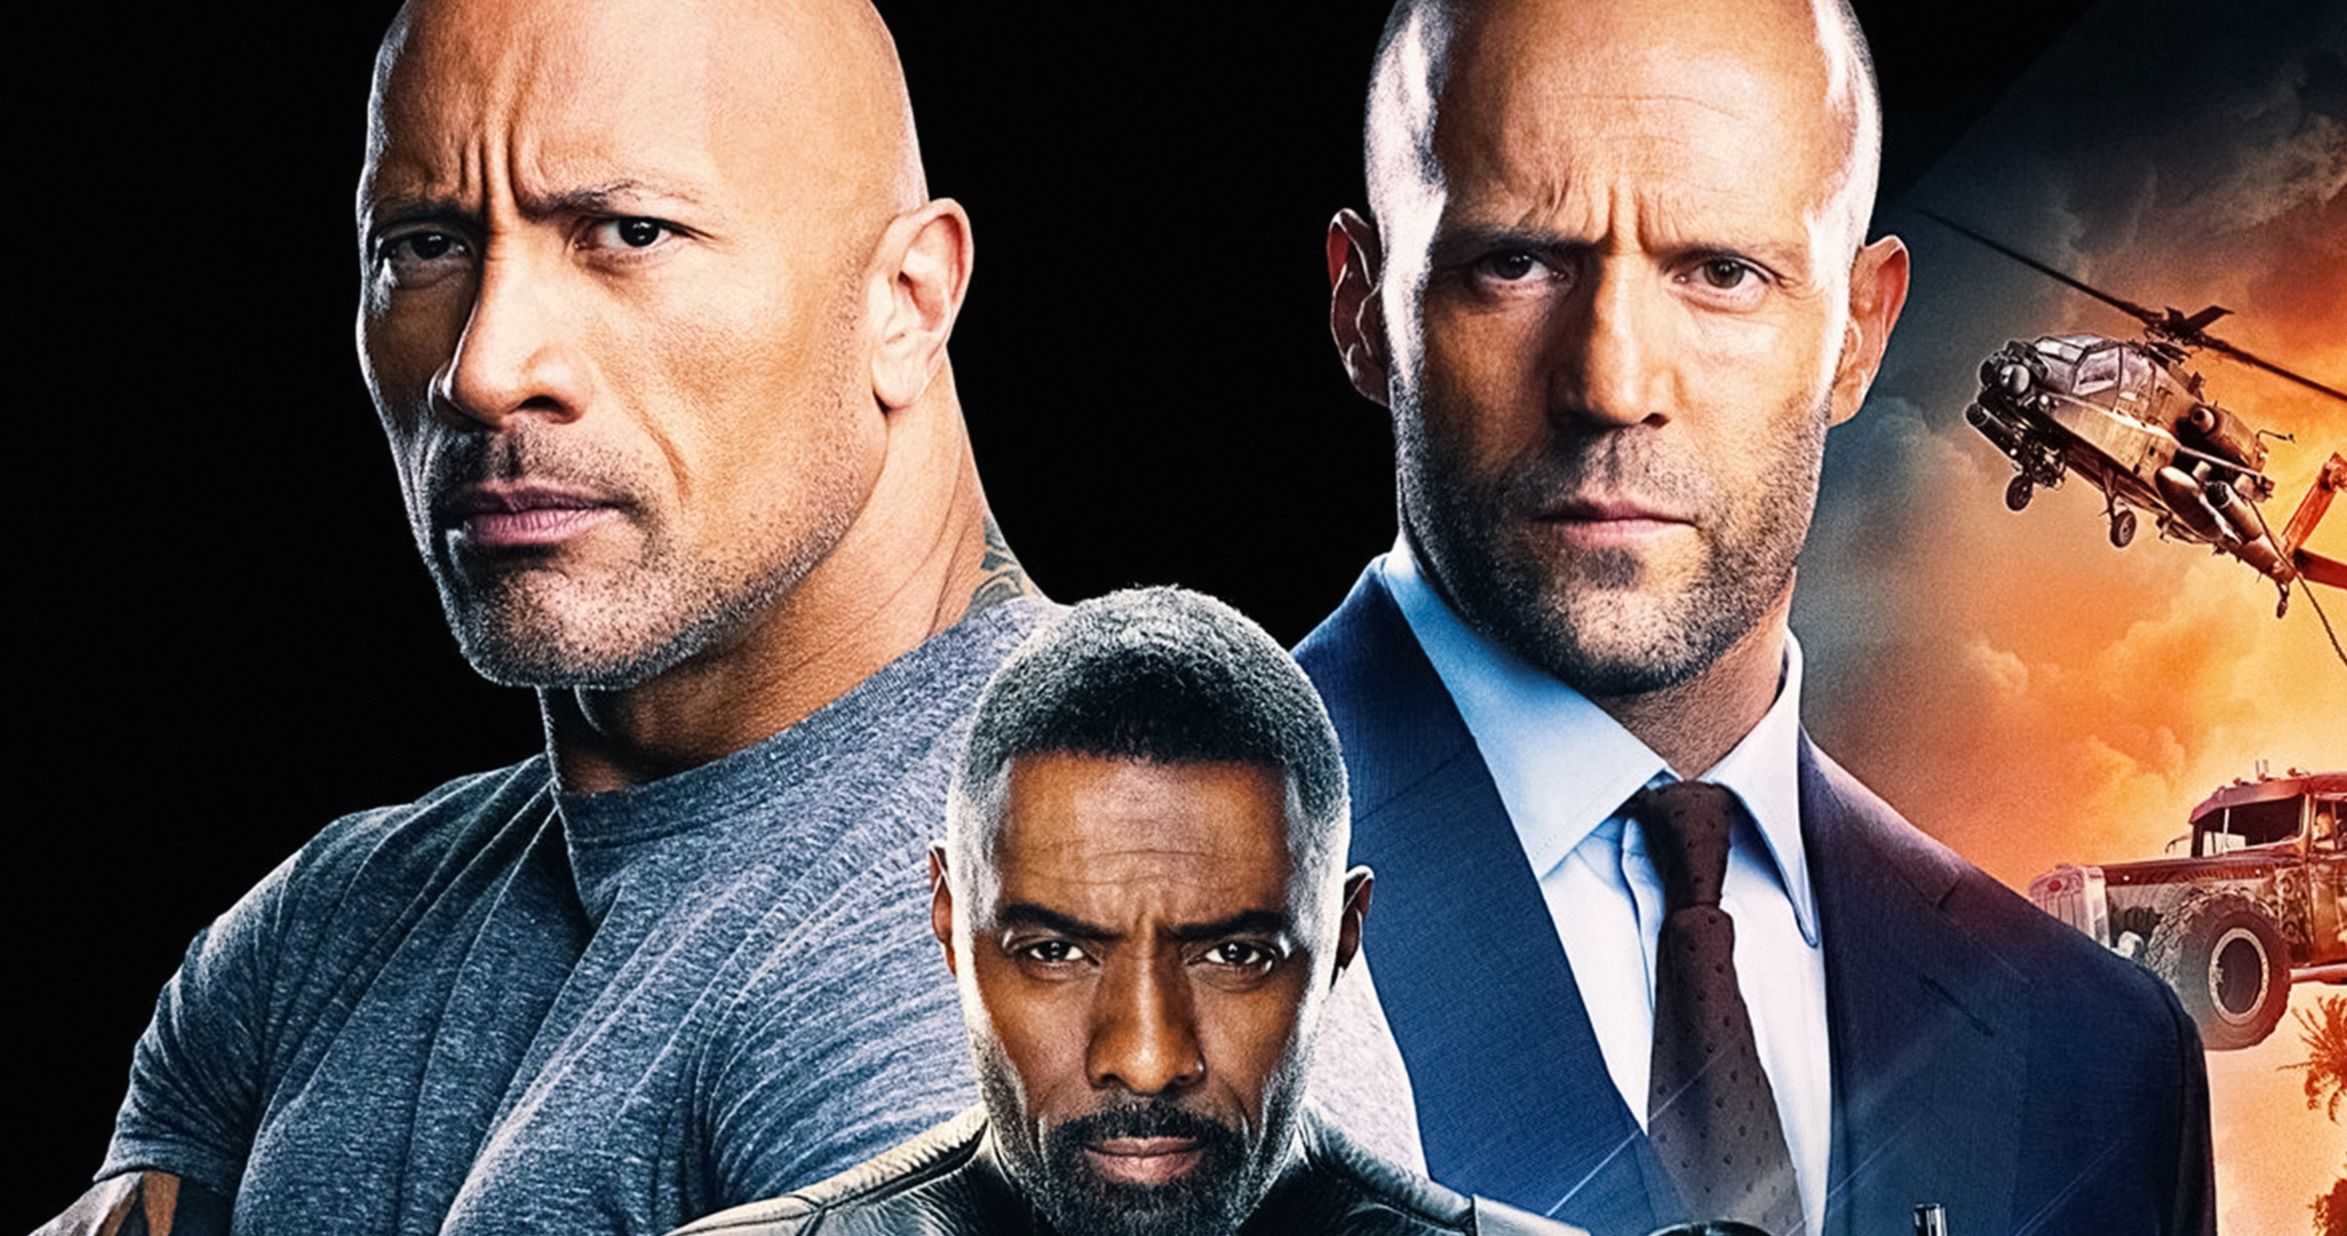 Hobbs &amp; Shaw Racing Toward Low $60M Opening, But Will Have Long Box Office Legs